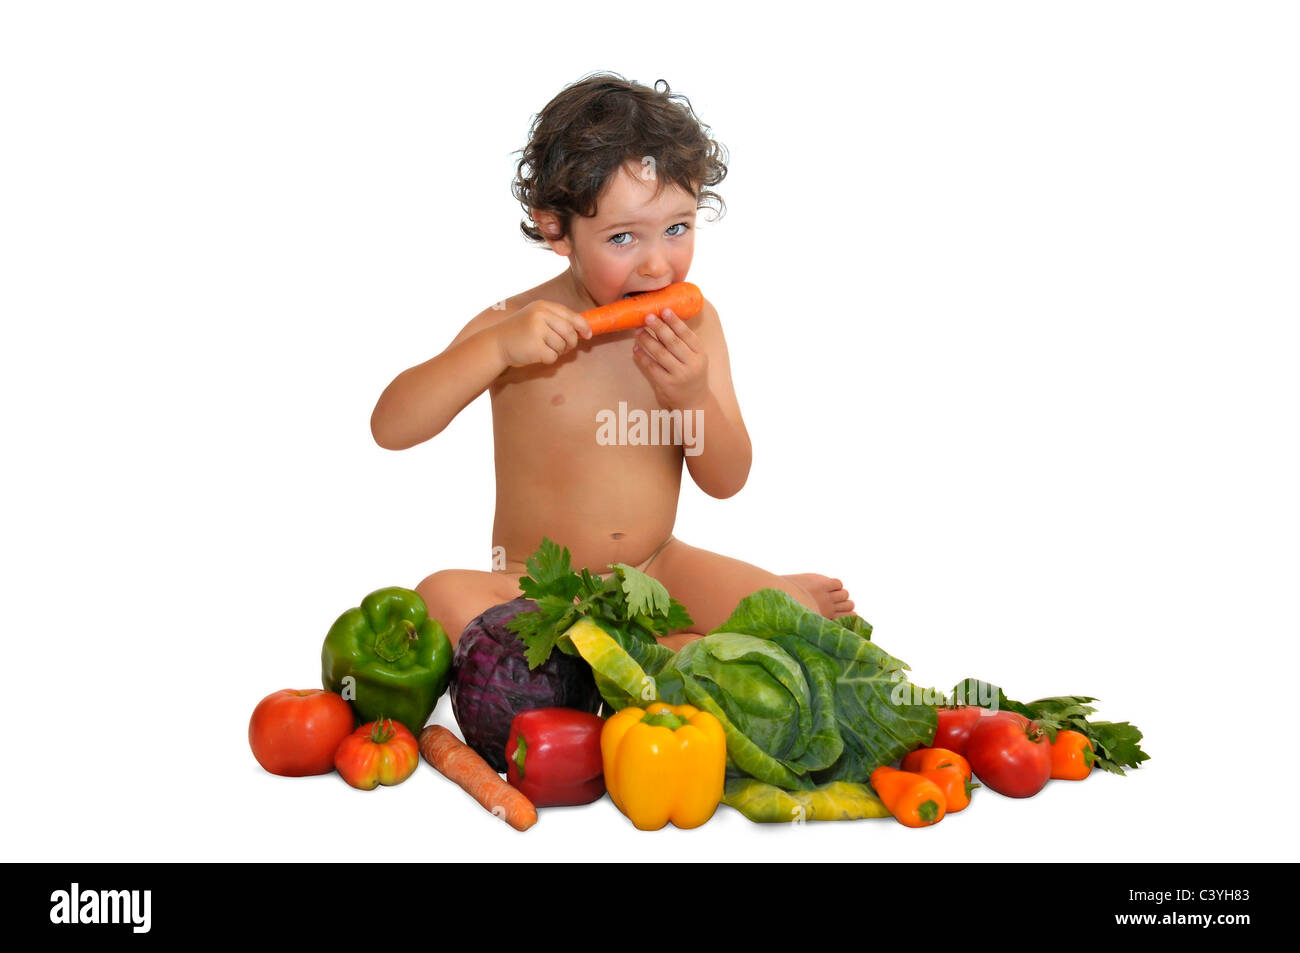 Beautiful young child with vegetables Stock Photo